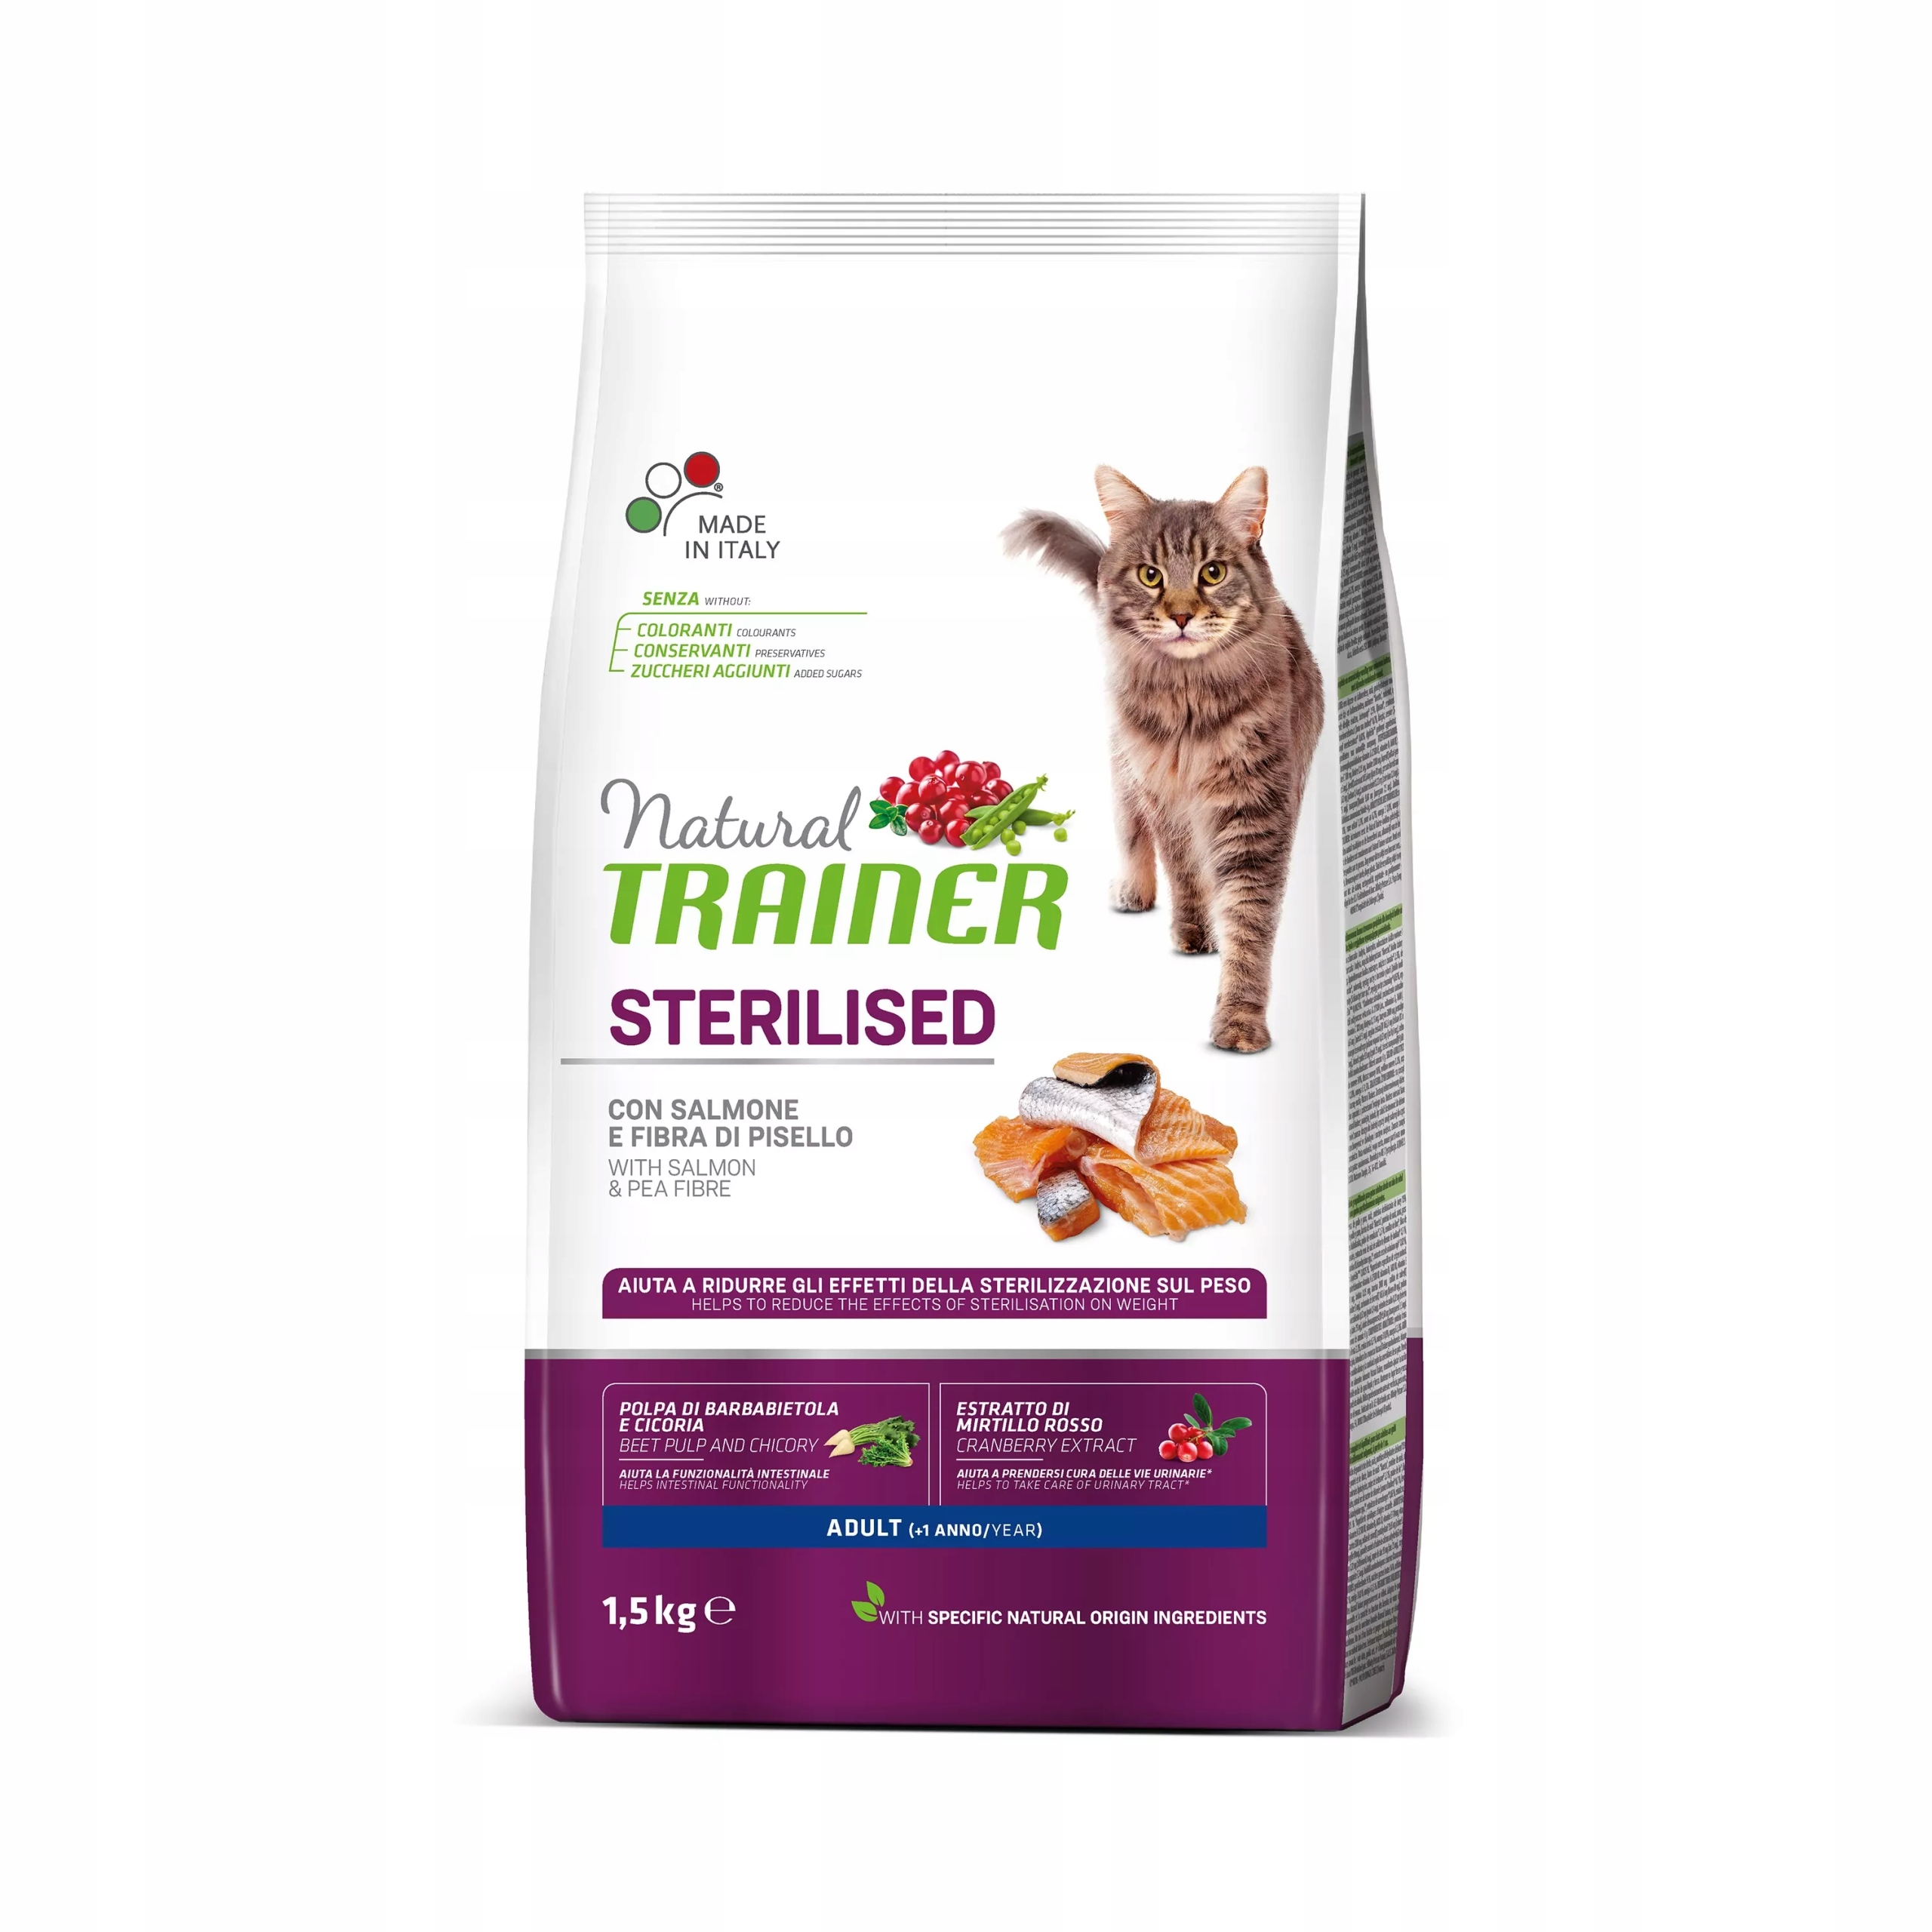 Natural trainer. Trainer Hairball для кошек natural. Корм для кошек Trainer natural Adult Cat Lamb canned (0.08 кг) 1 шт.. Корм для кошек Trainer personal Adult Cat Hairball. Natural Trainer Sterilised.